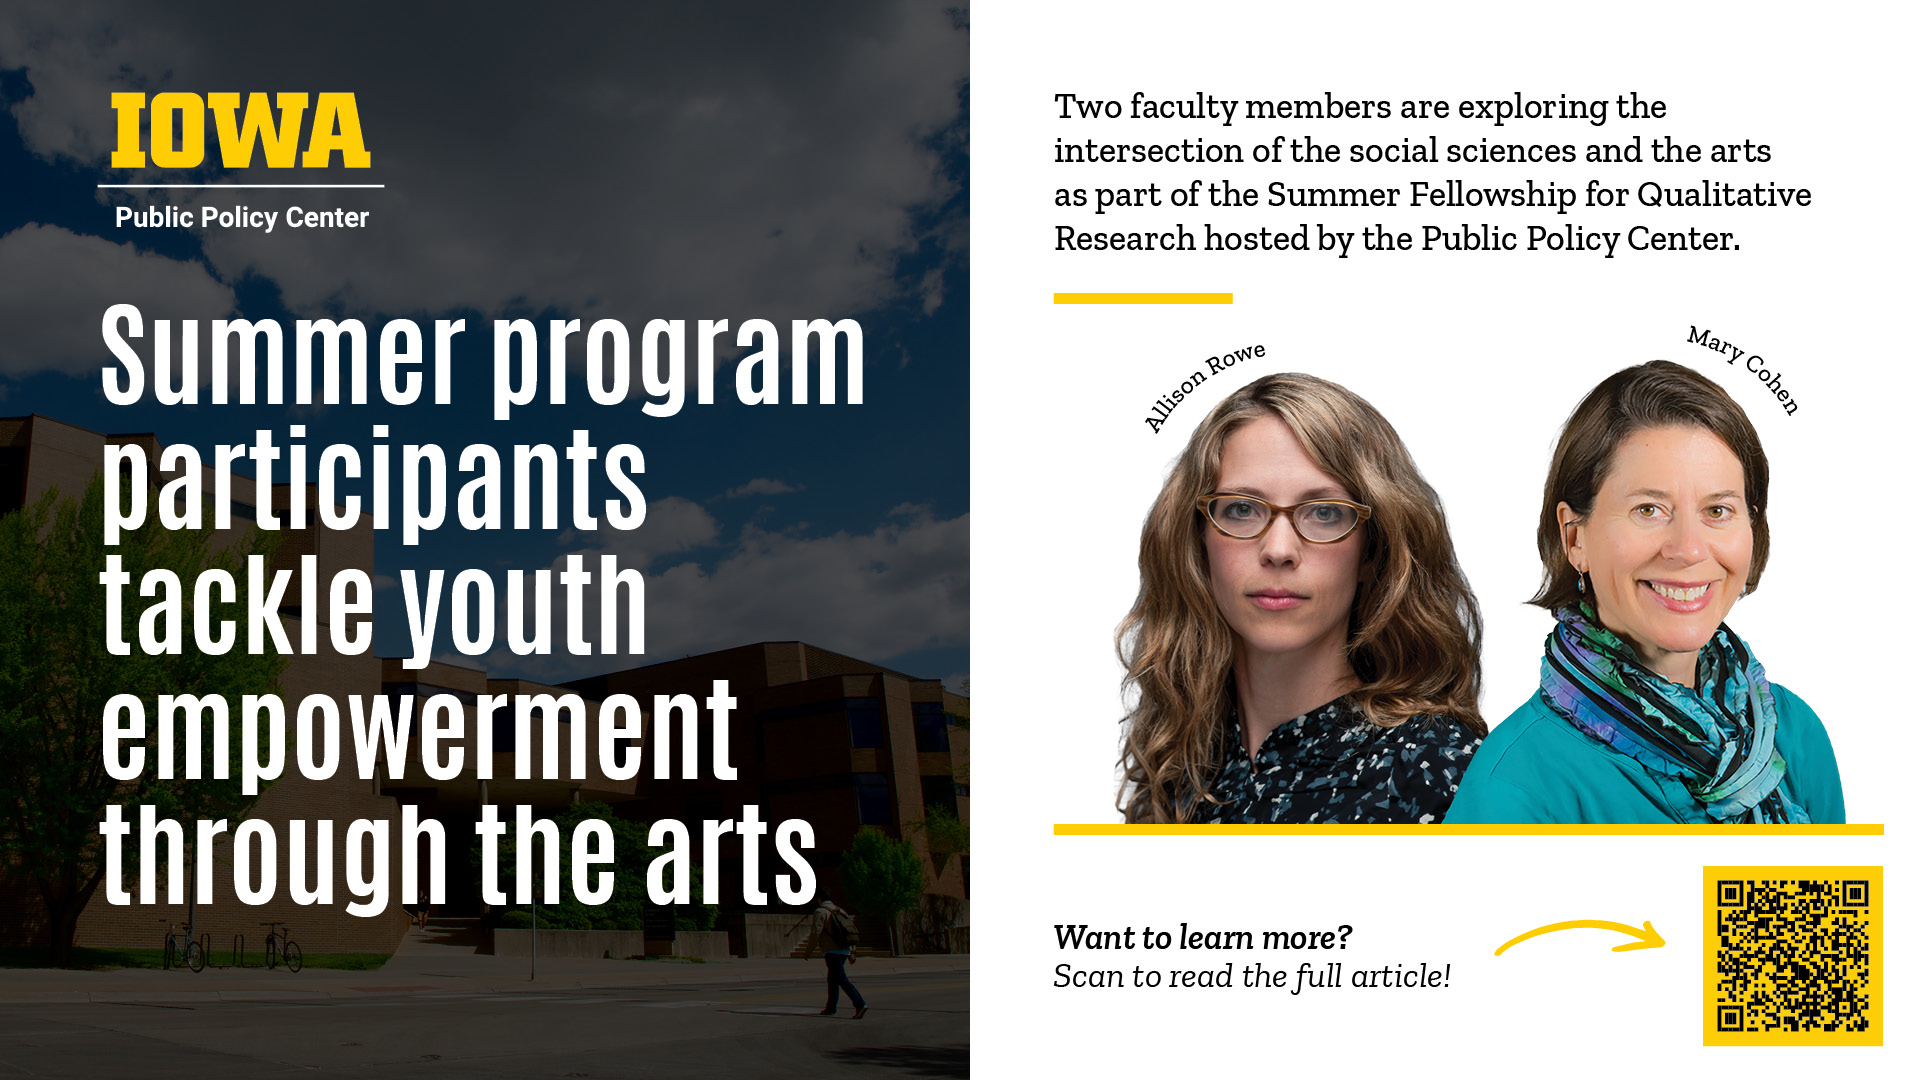 Mary Cohen and Allison Rowe's headshots sit beside text that says, "Summer program participants tackle youth empowerment through the arts."